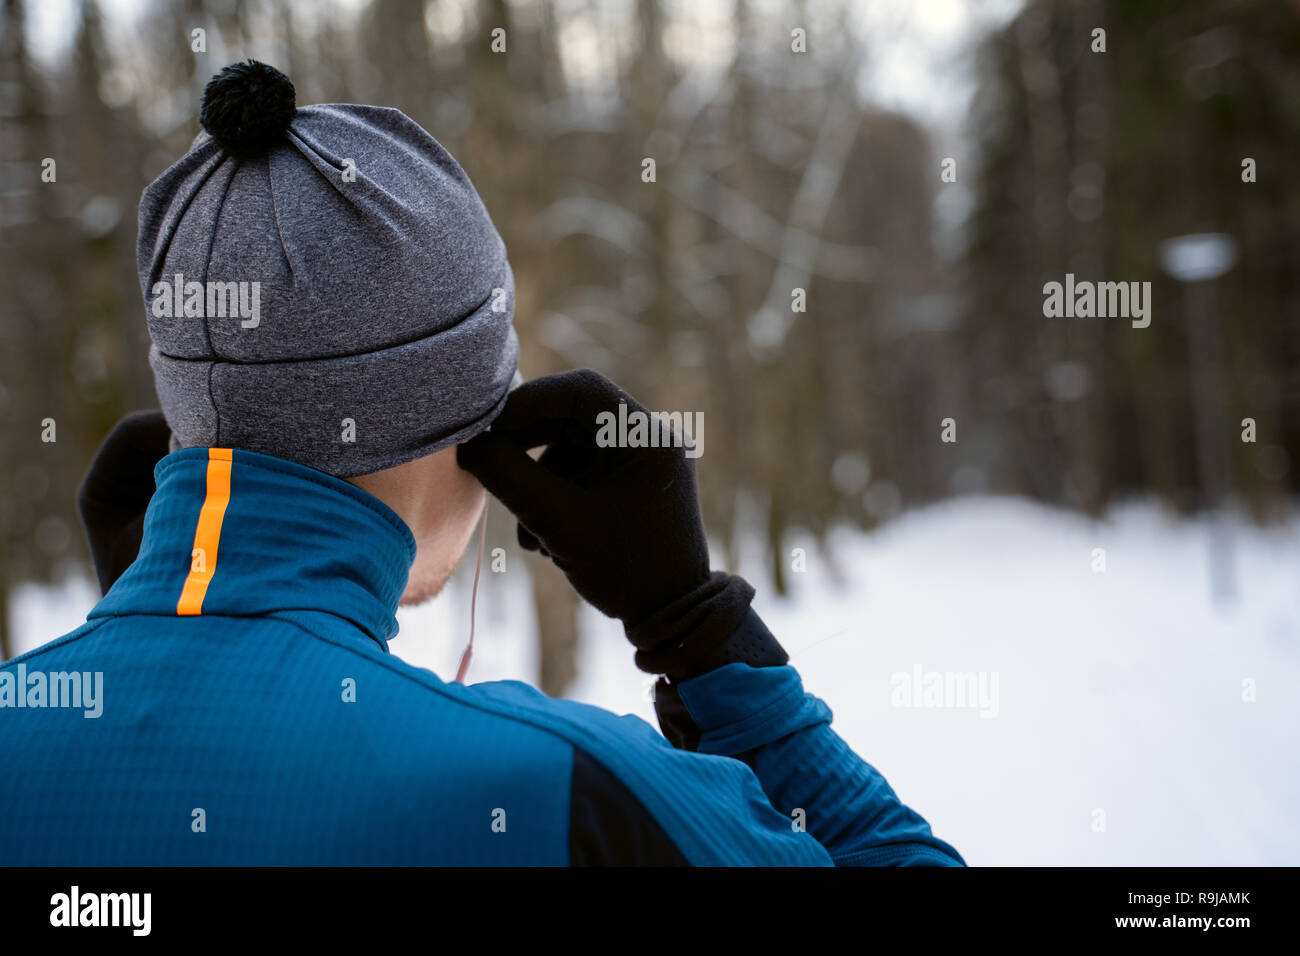 Portrait of a runner from the back wearing headphones and preparing to run in the winter forest Stock Photo